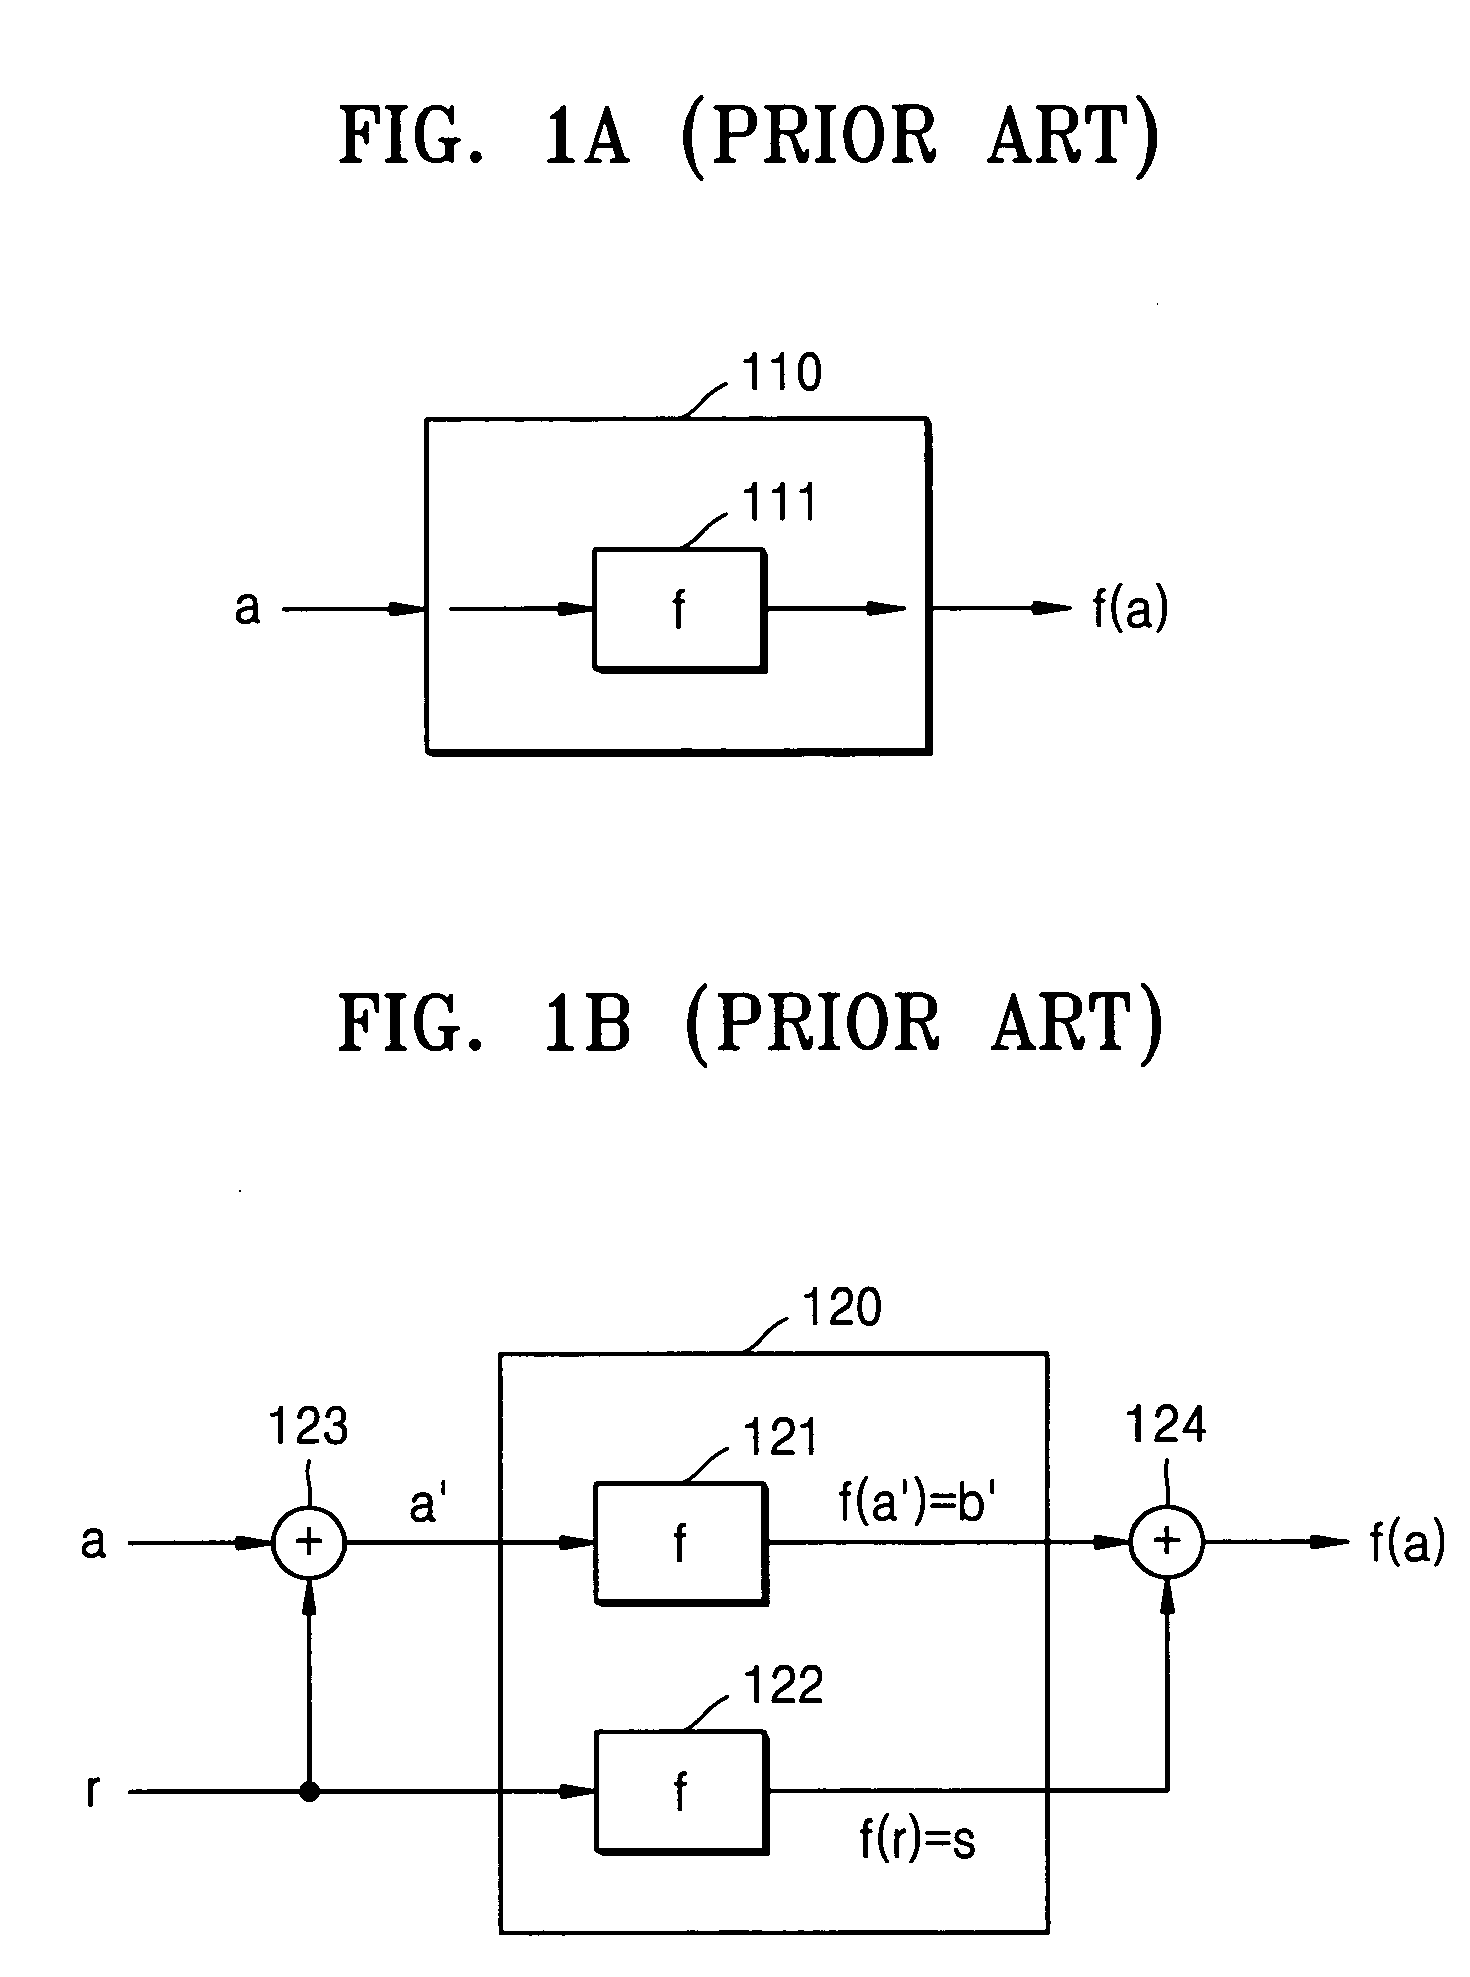 Data cipher processors, AES cipher systems, and AES cipher methods using a masking method